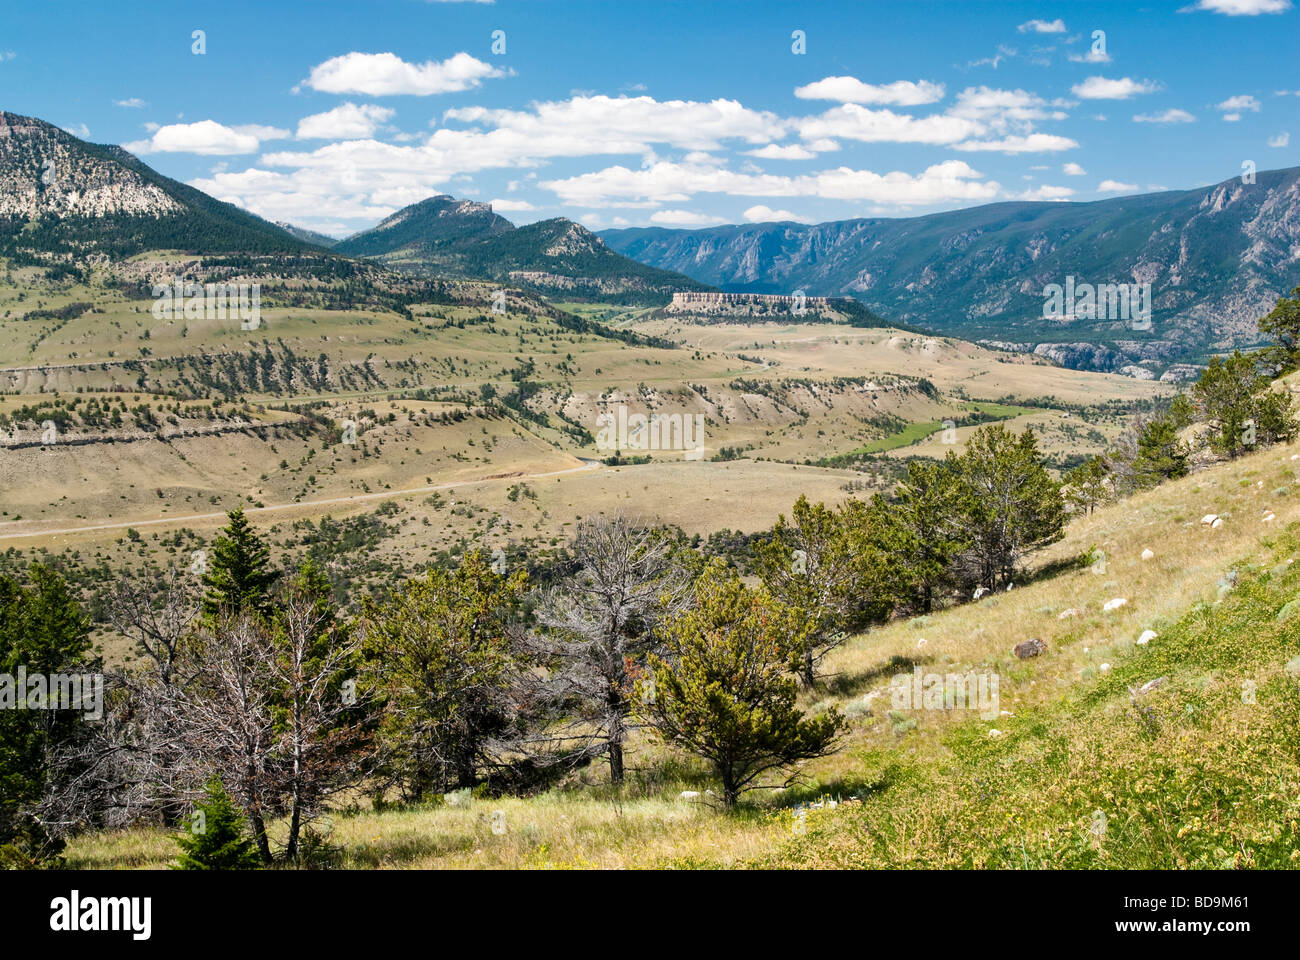 View of the mountains and valleys along Chief Joseph Scenic Byway in Wyoming Stock Photo